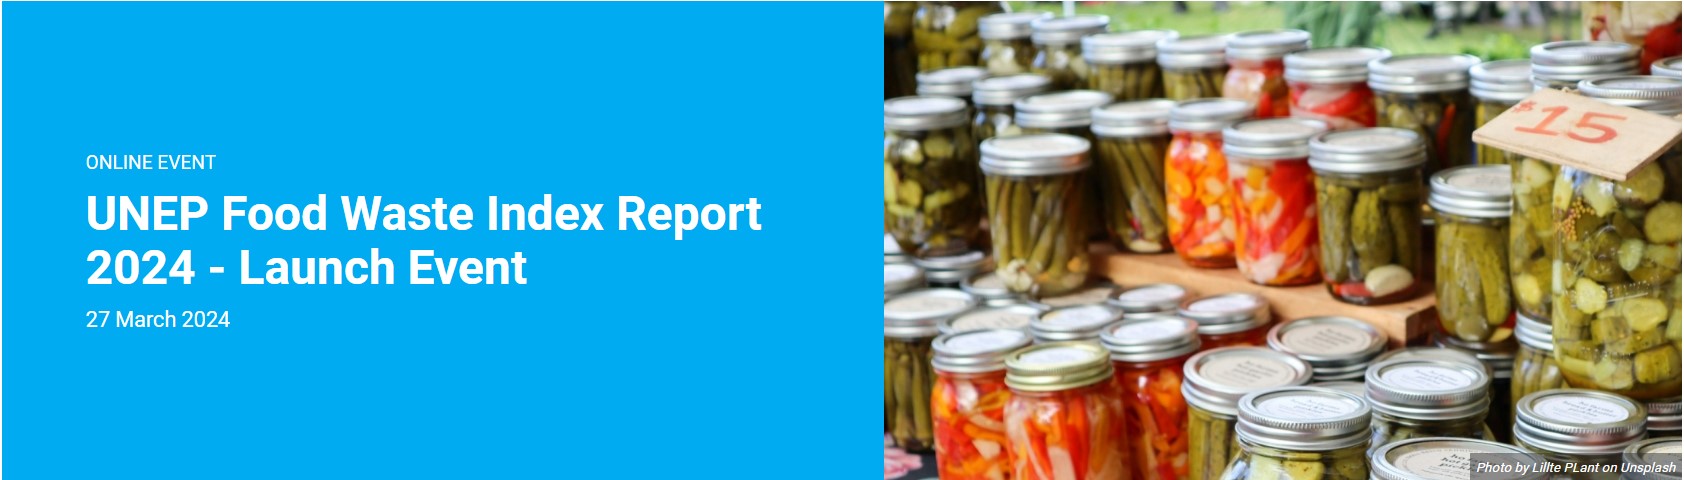 UNEP Food Waste Index Report 2024 - Launch Event